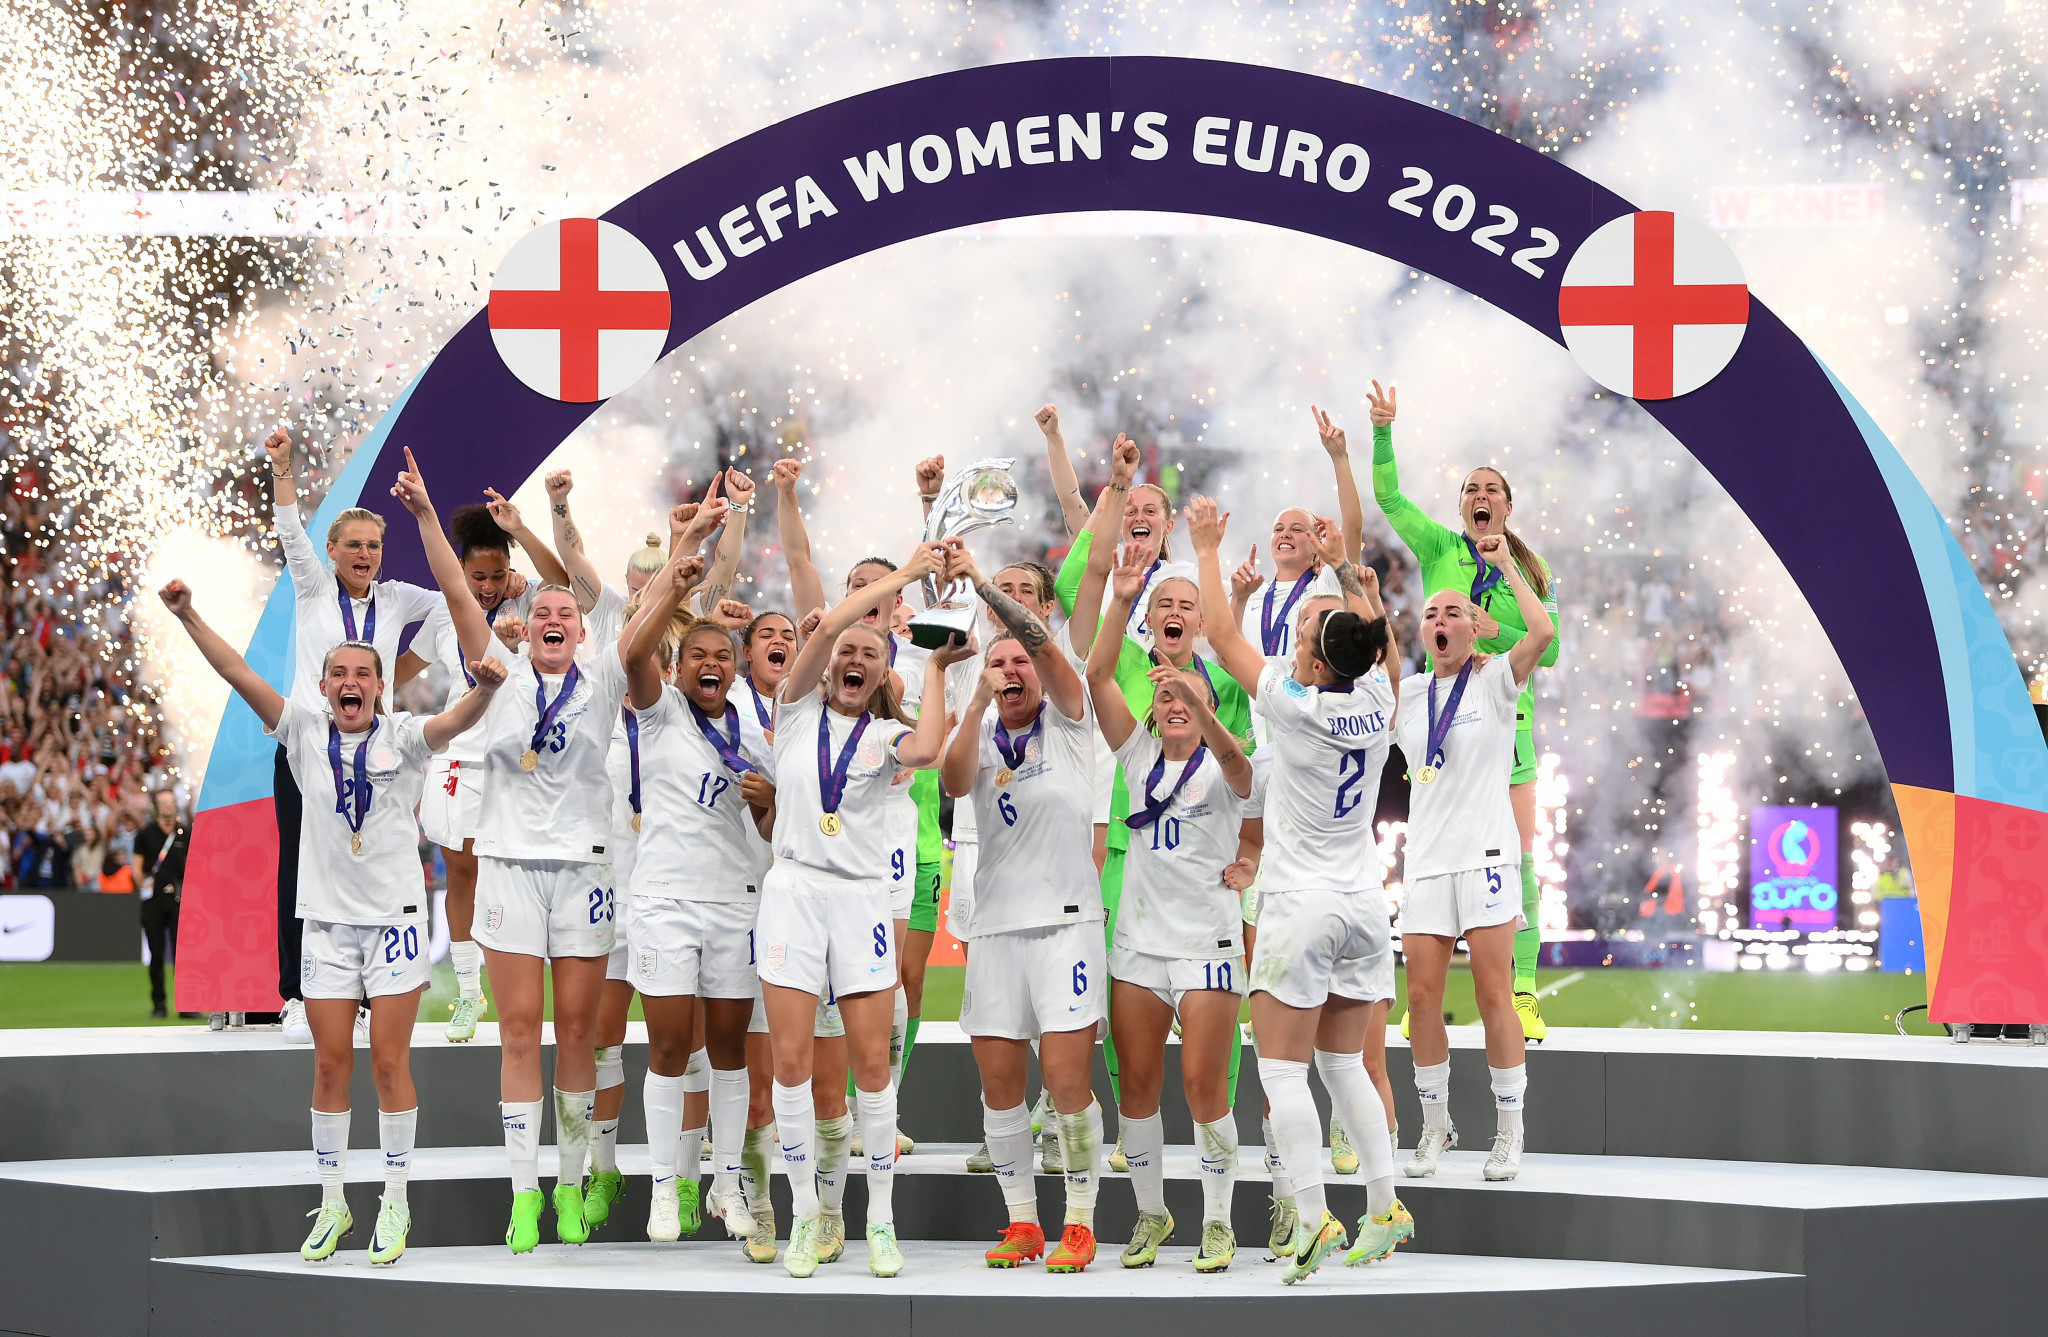 Girls to get equal access to school sport after England's Women's Euro 2022 win